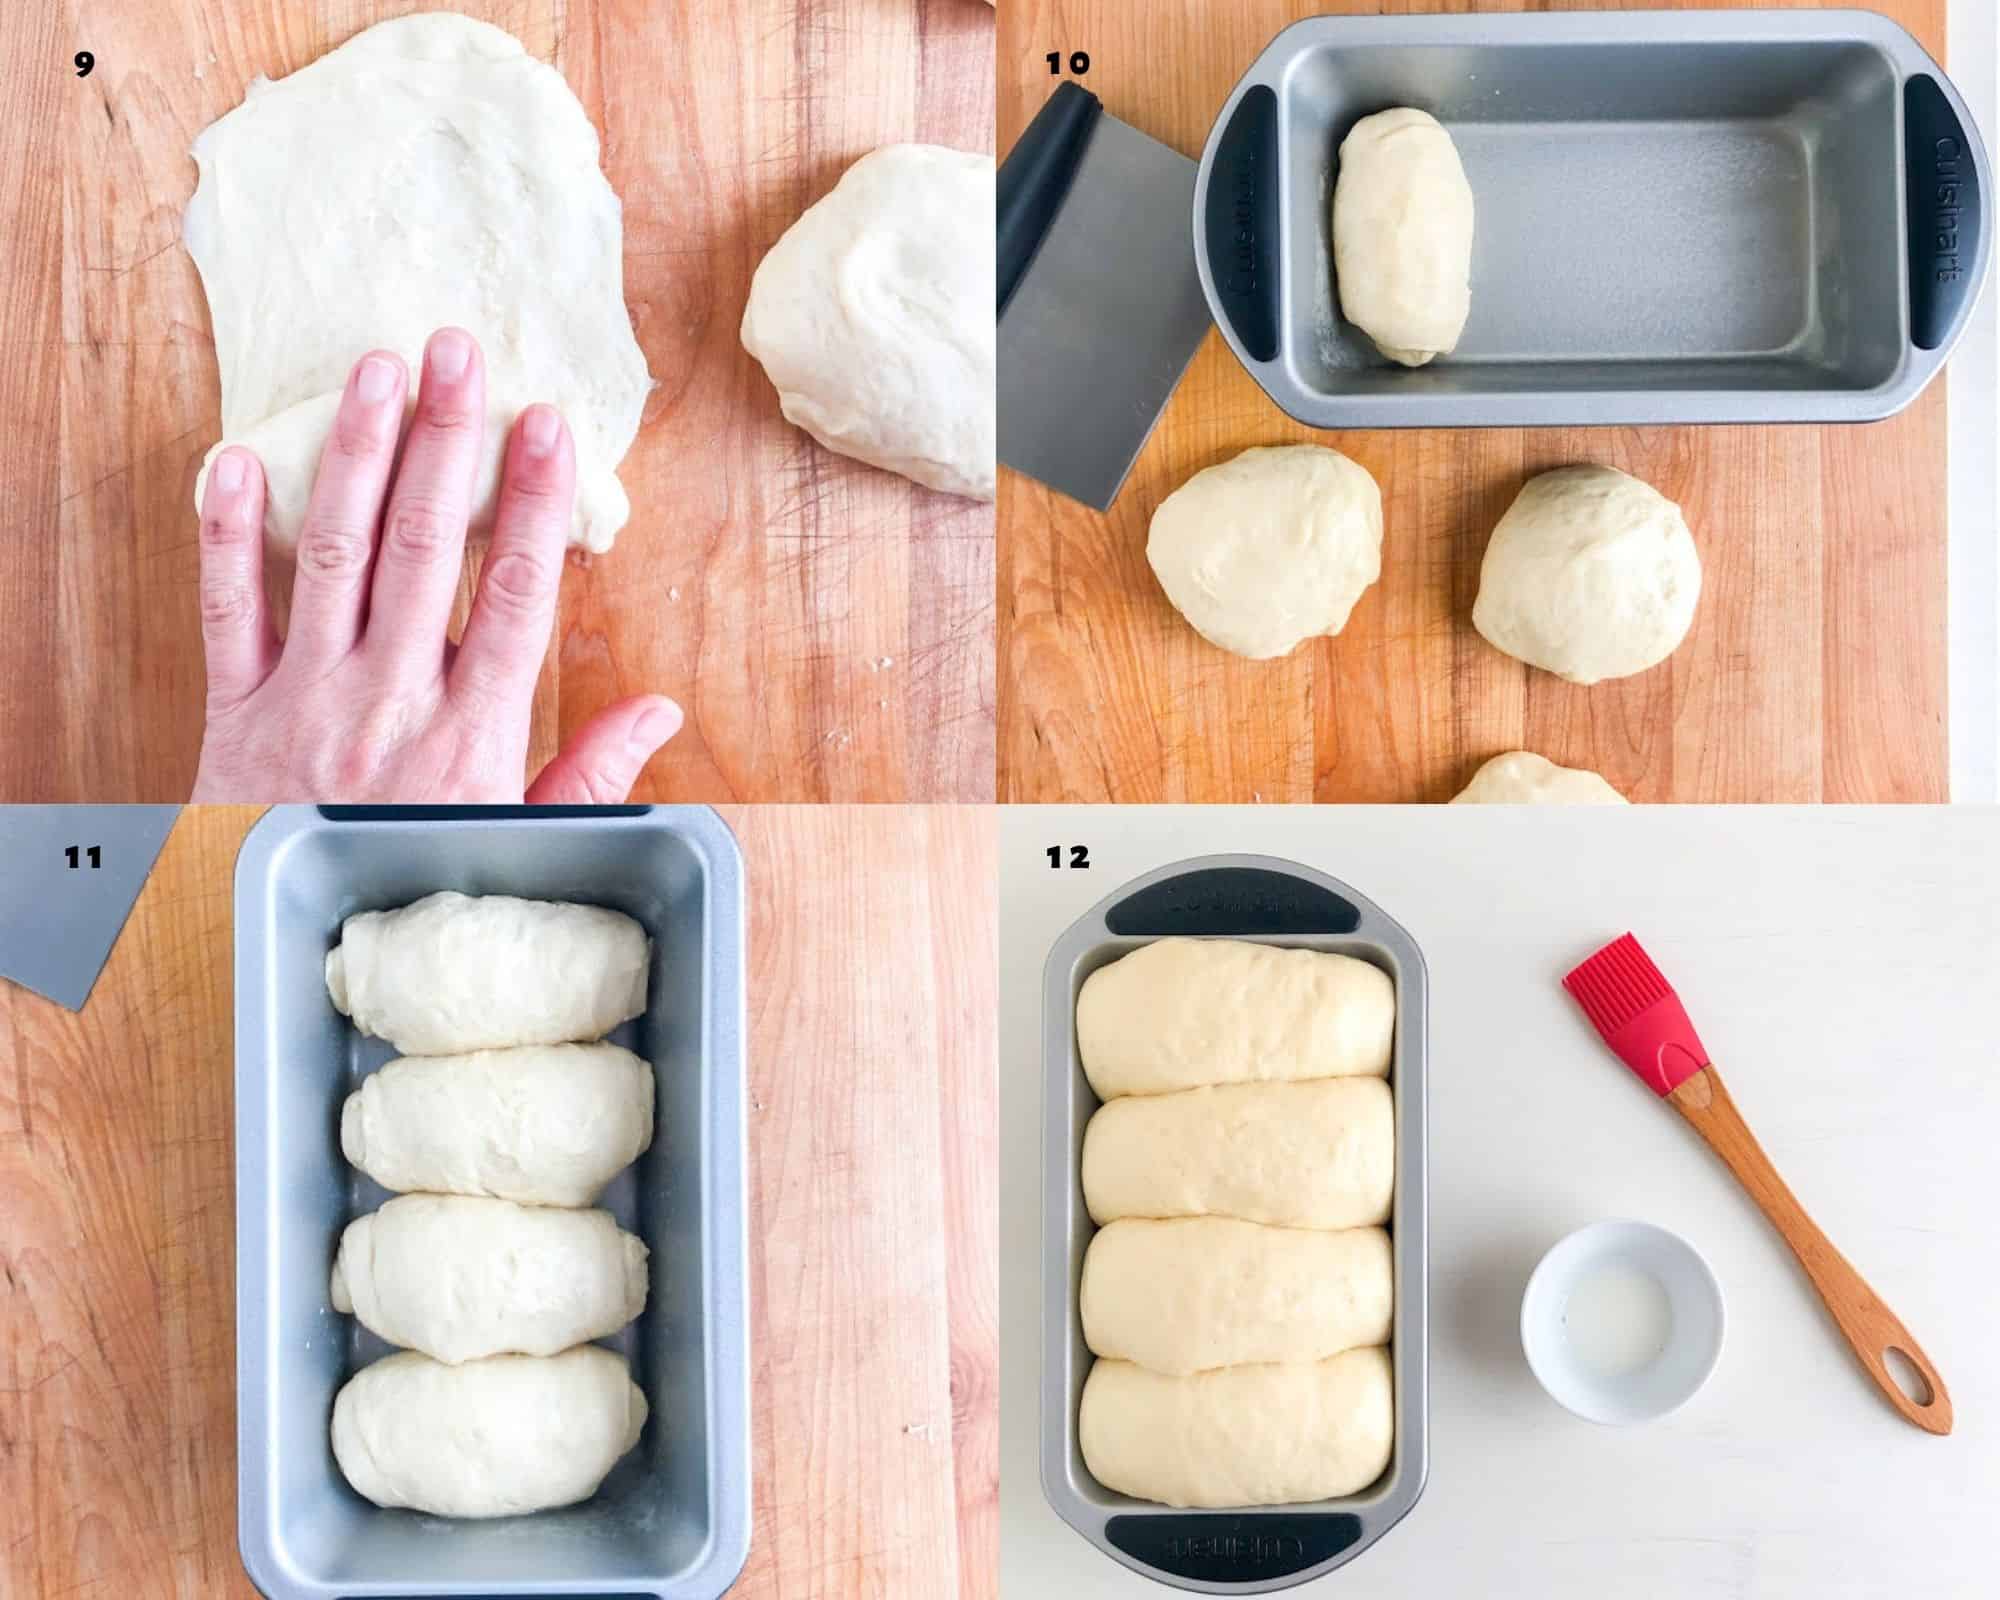 Process shots for rolling out the bread dough and brushing proofed dough before baking.